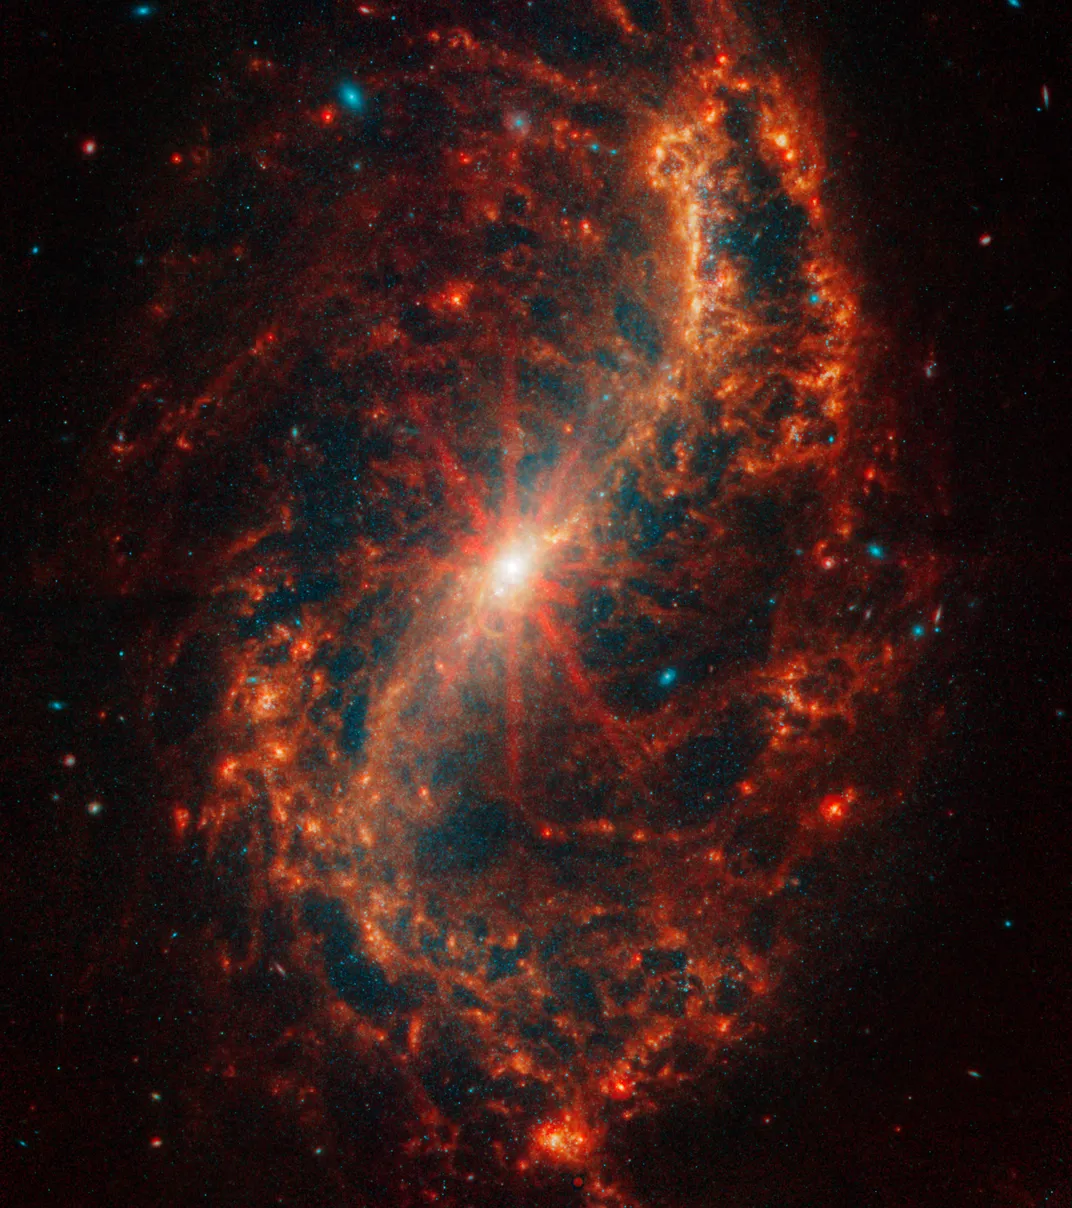 a spiral galaxy in red with some bright diffraction spikes coming from its glowing white center